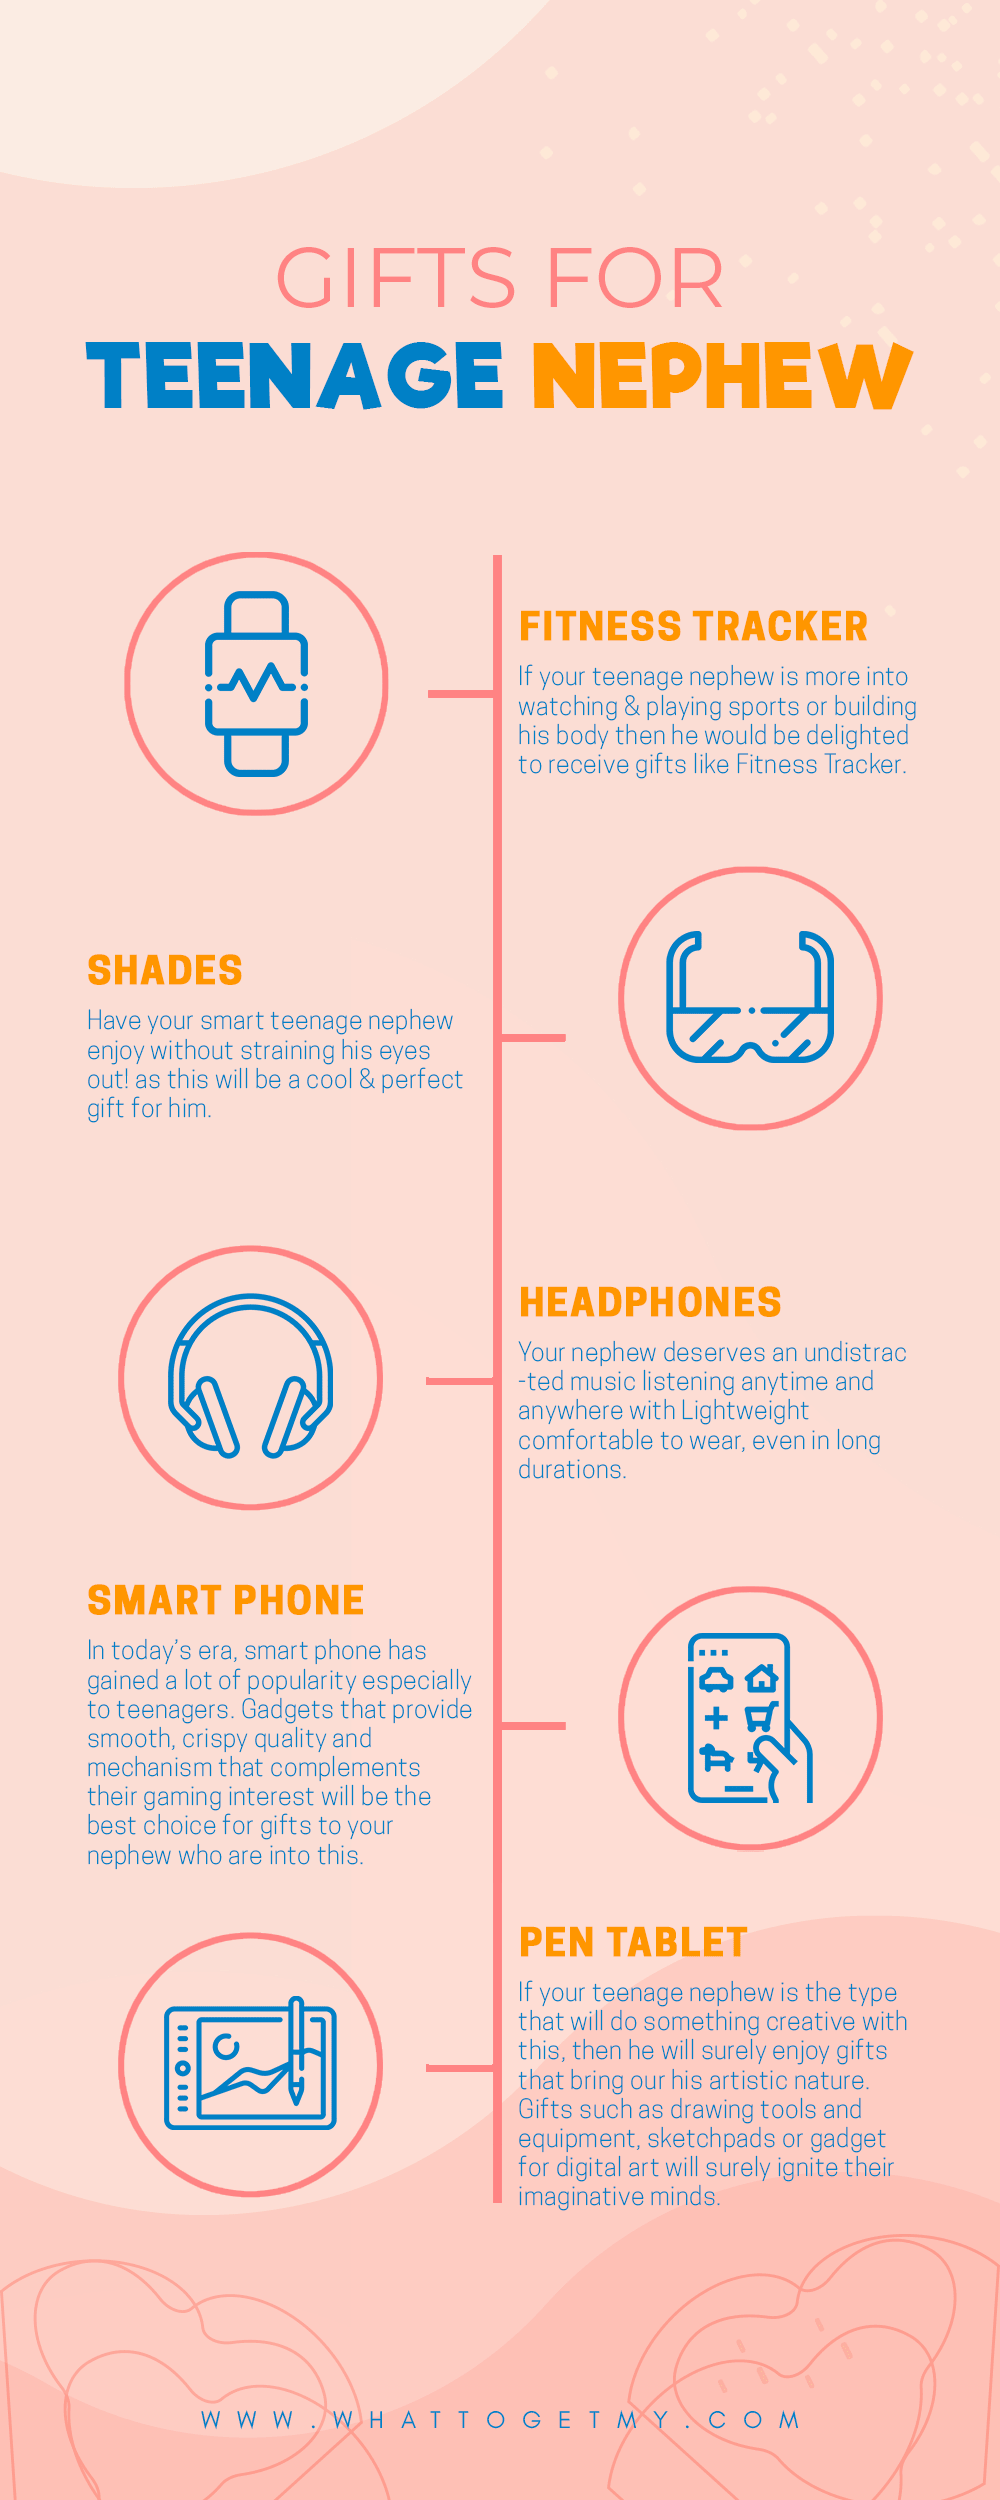 Infographic Gifts For Teenage Nephew